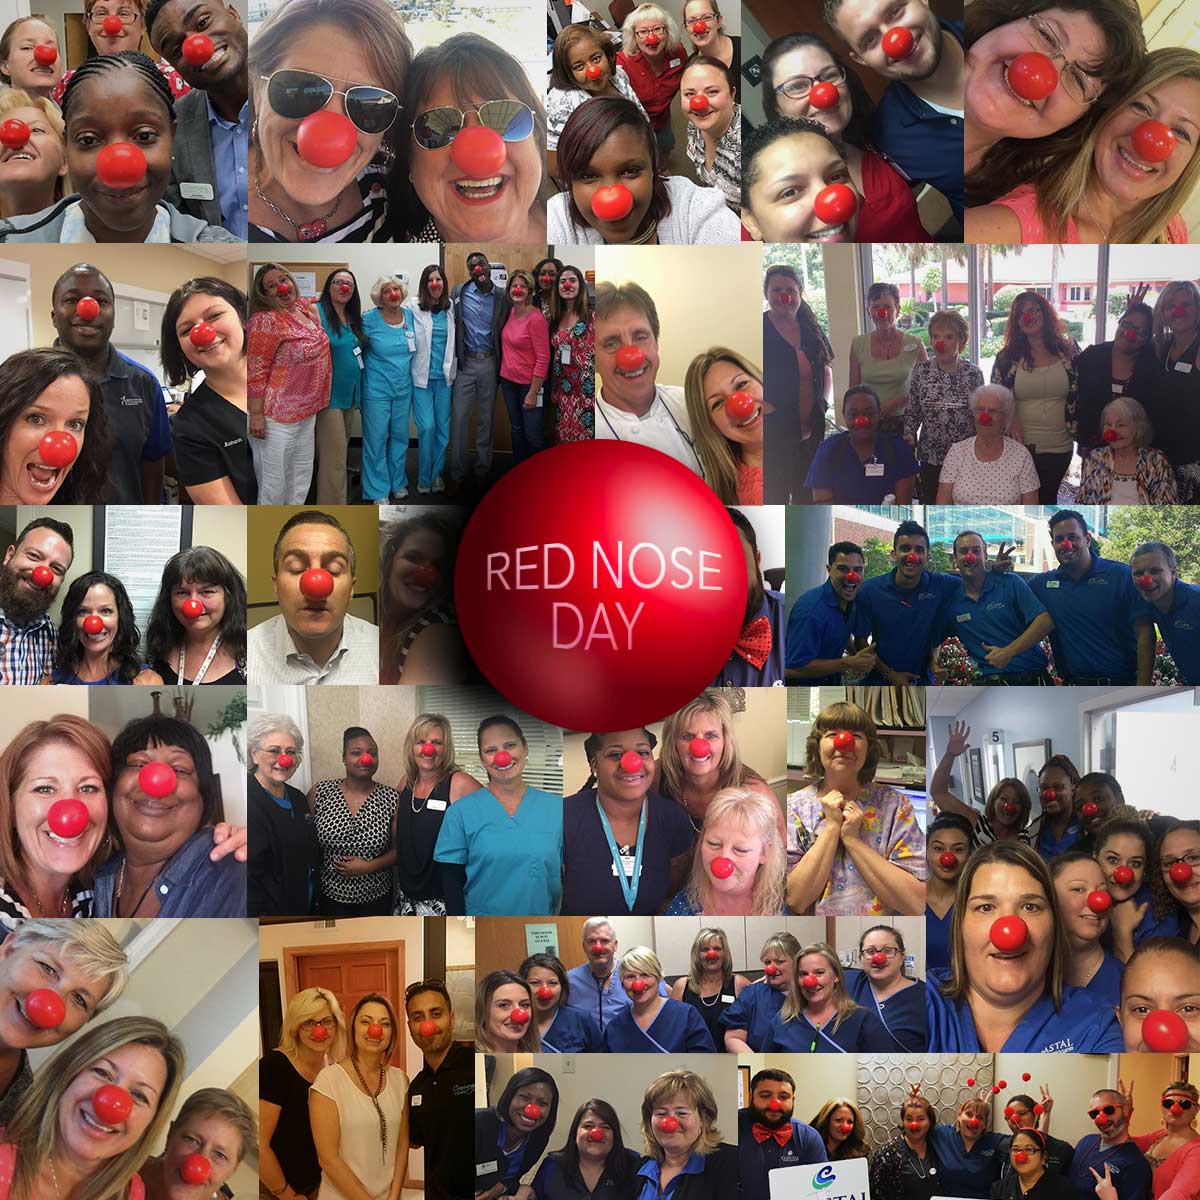 Pictures of team member wearing red noses